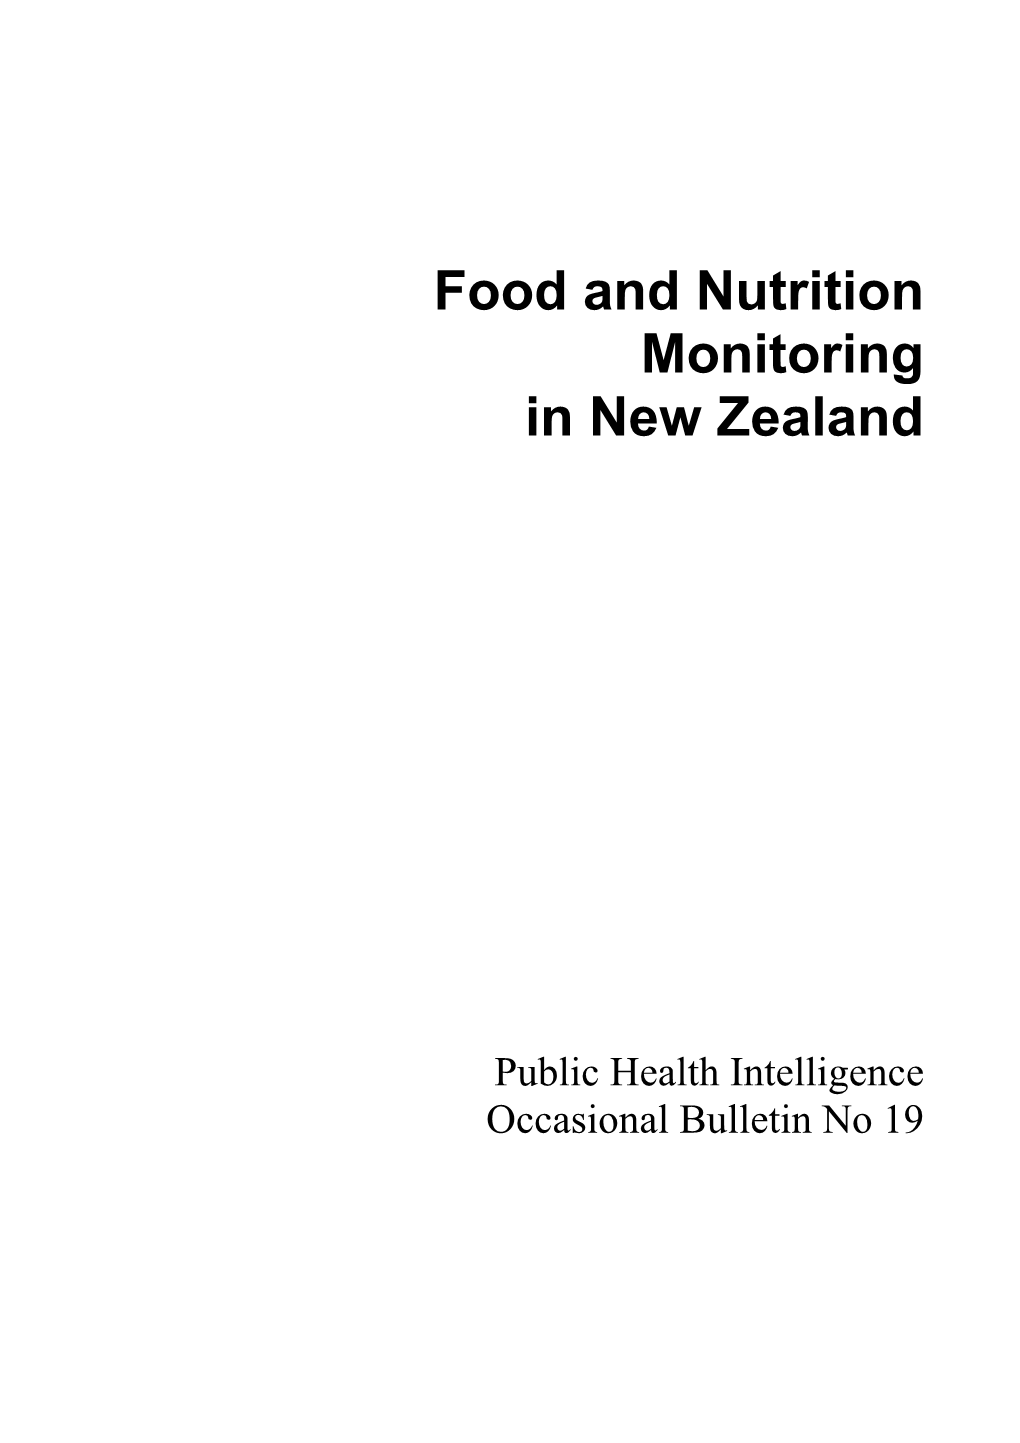 Food and Nutrition Monitoring in New Zealand